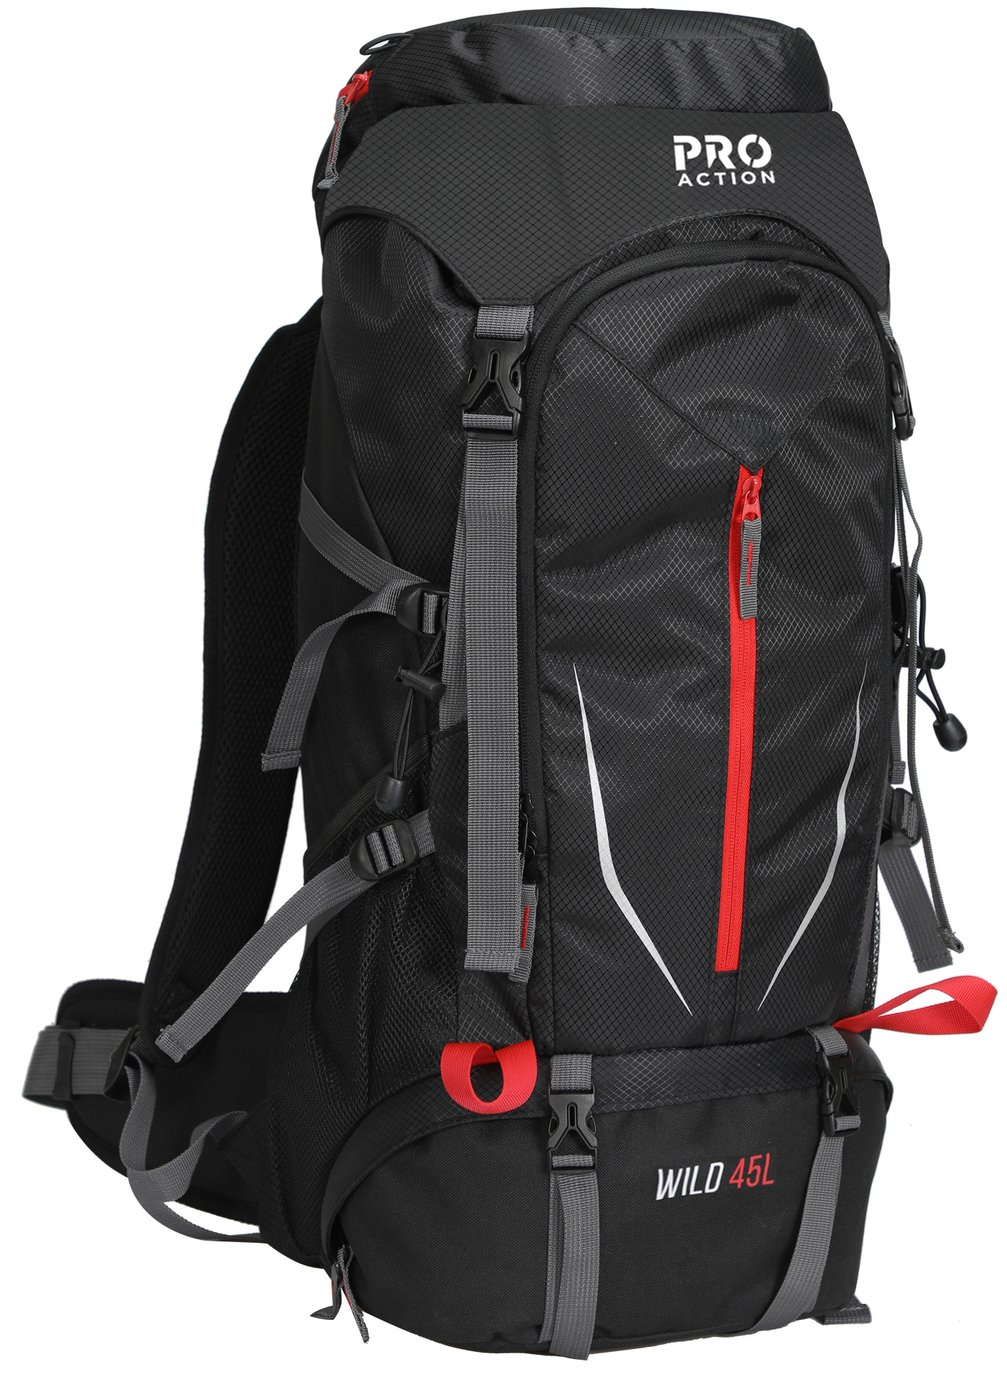 ProAction Wild 45L Backpack Review